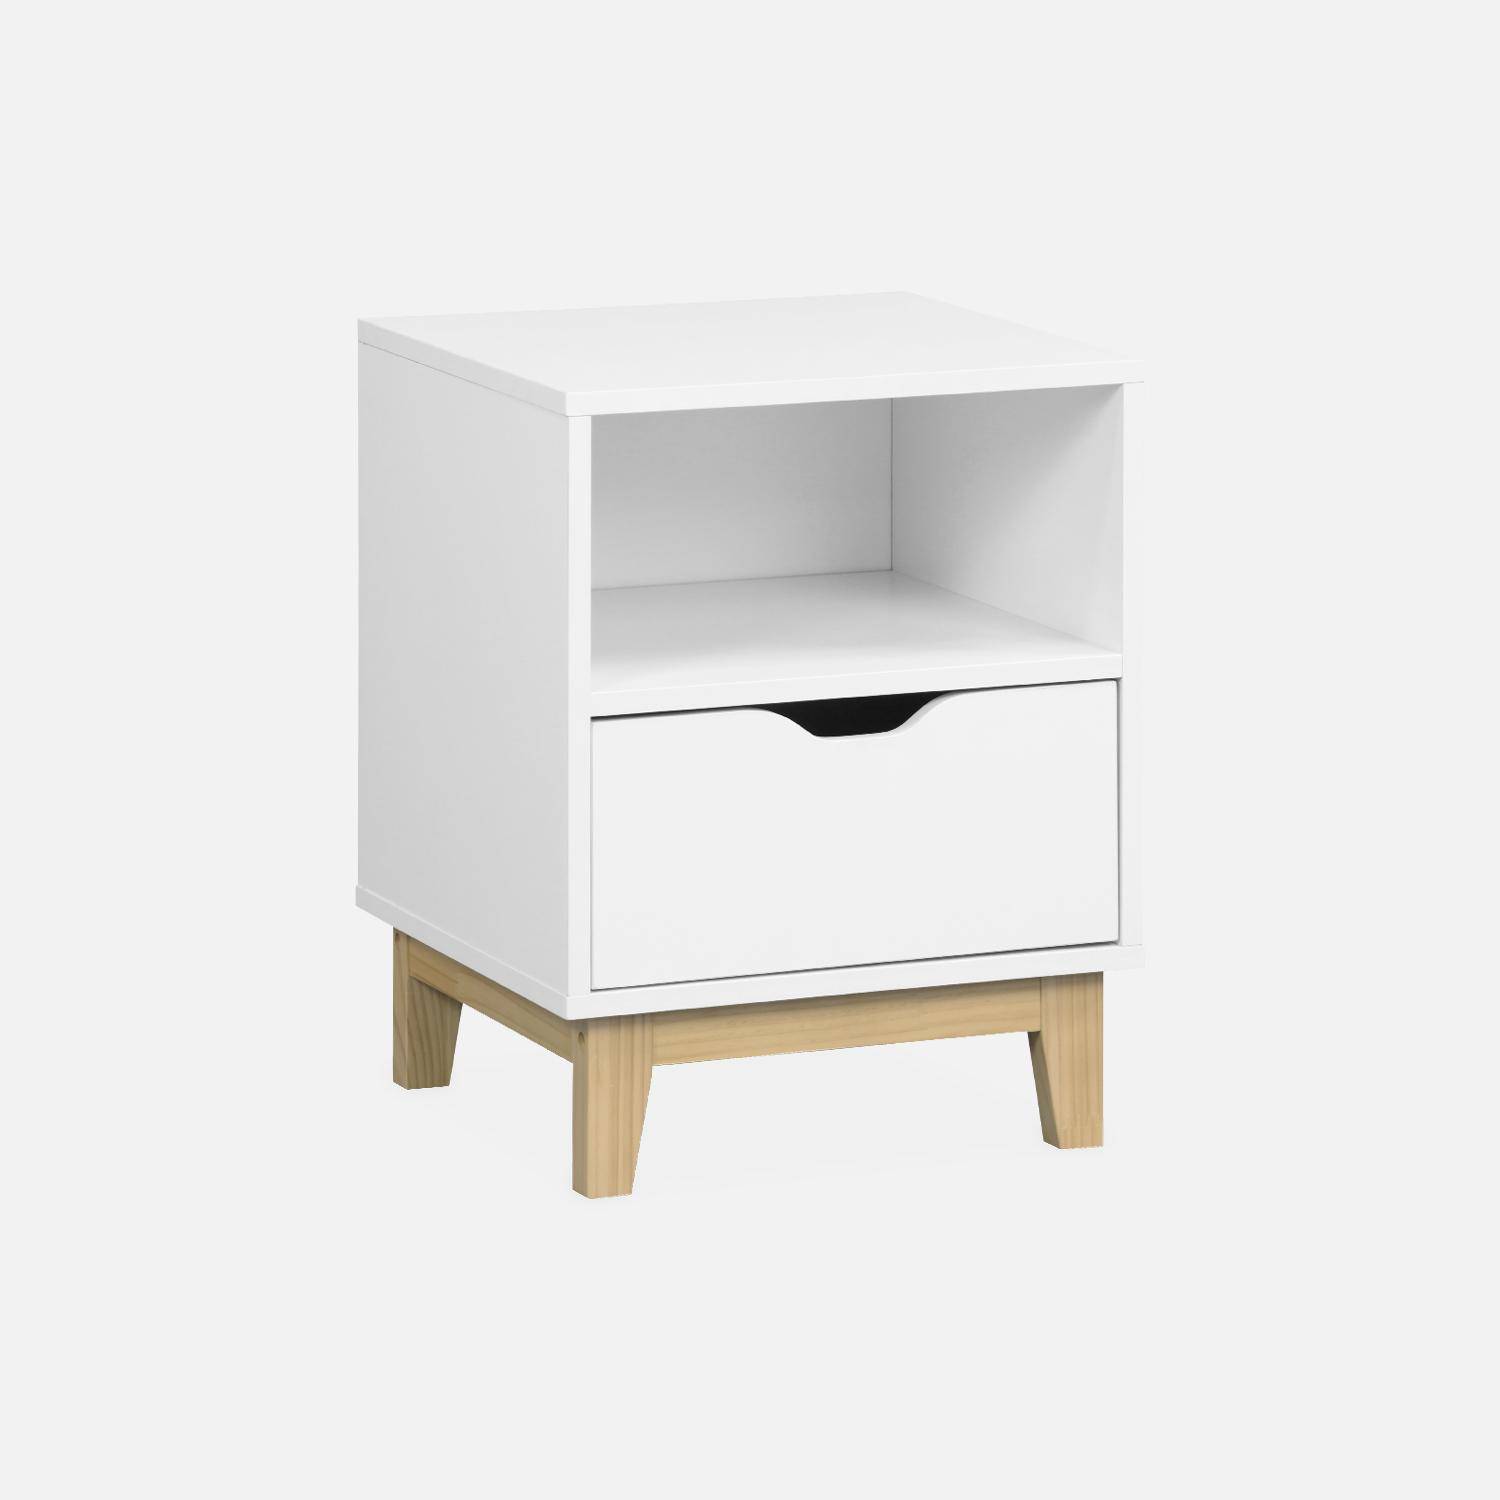 White bedside table with fir wood legs - Floki - 40 x 39 x 52cm - 1 drawer and 1 niche Photo4